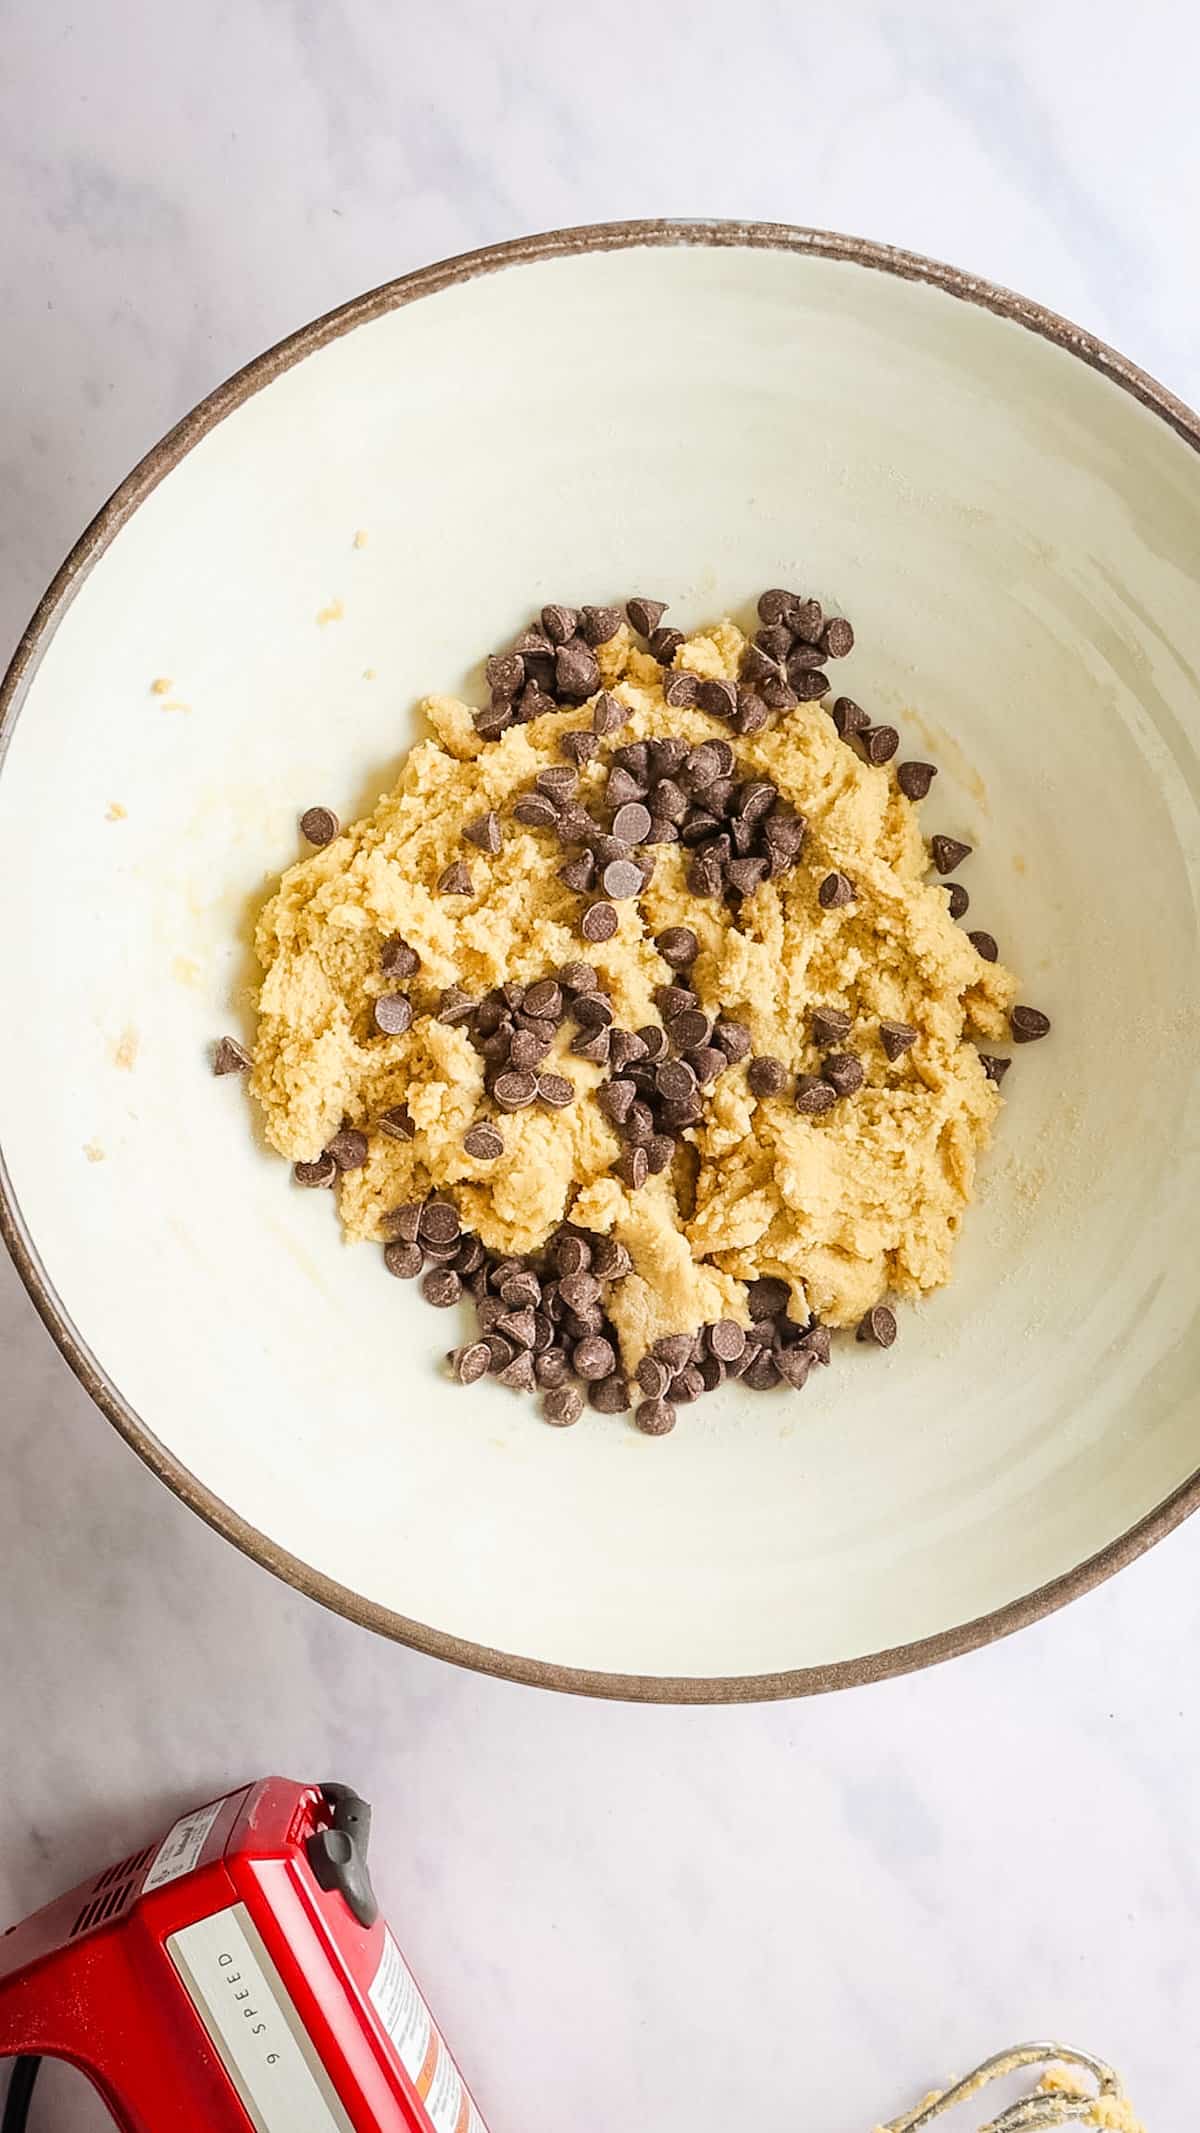 Overhead view of chocolate chips added to mixing bowl with cookie dough.